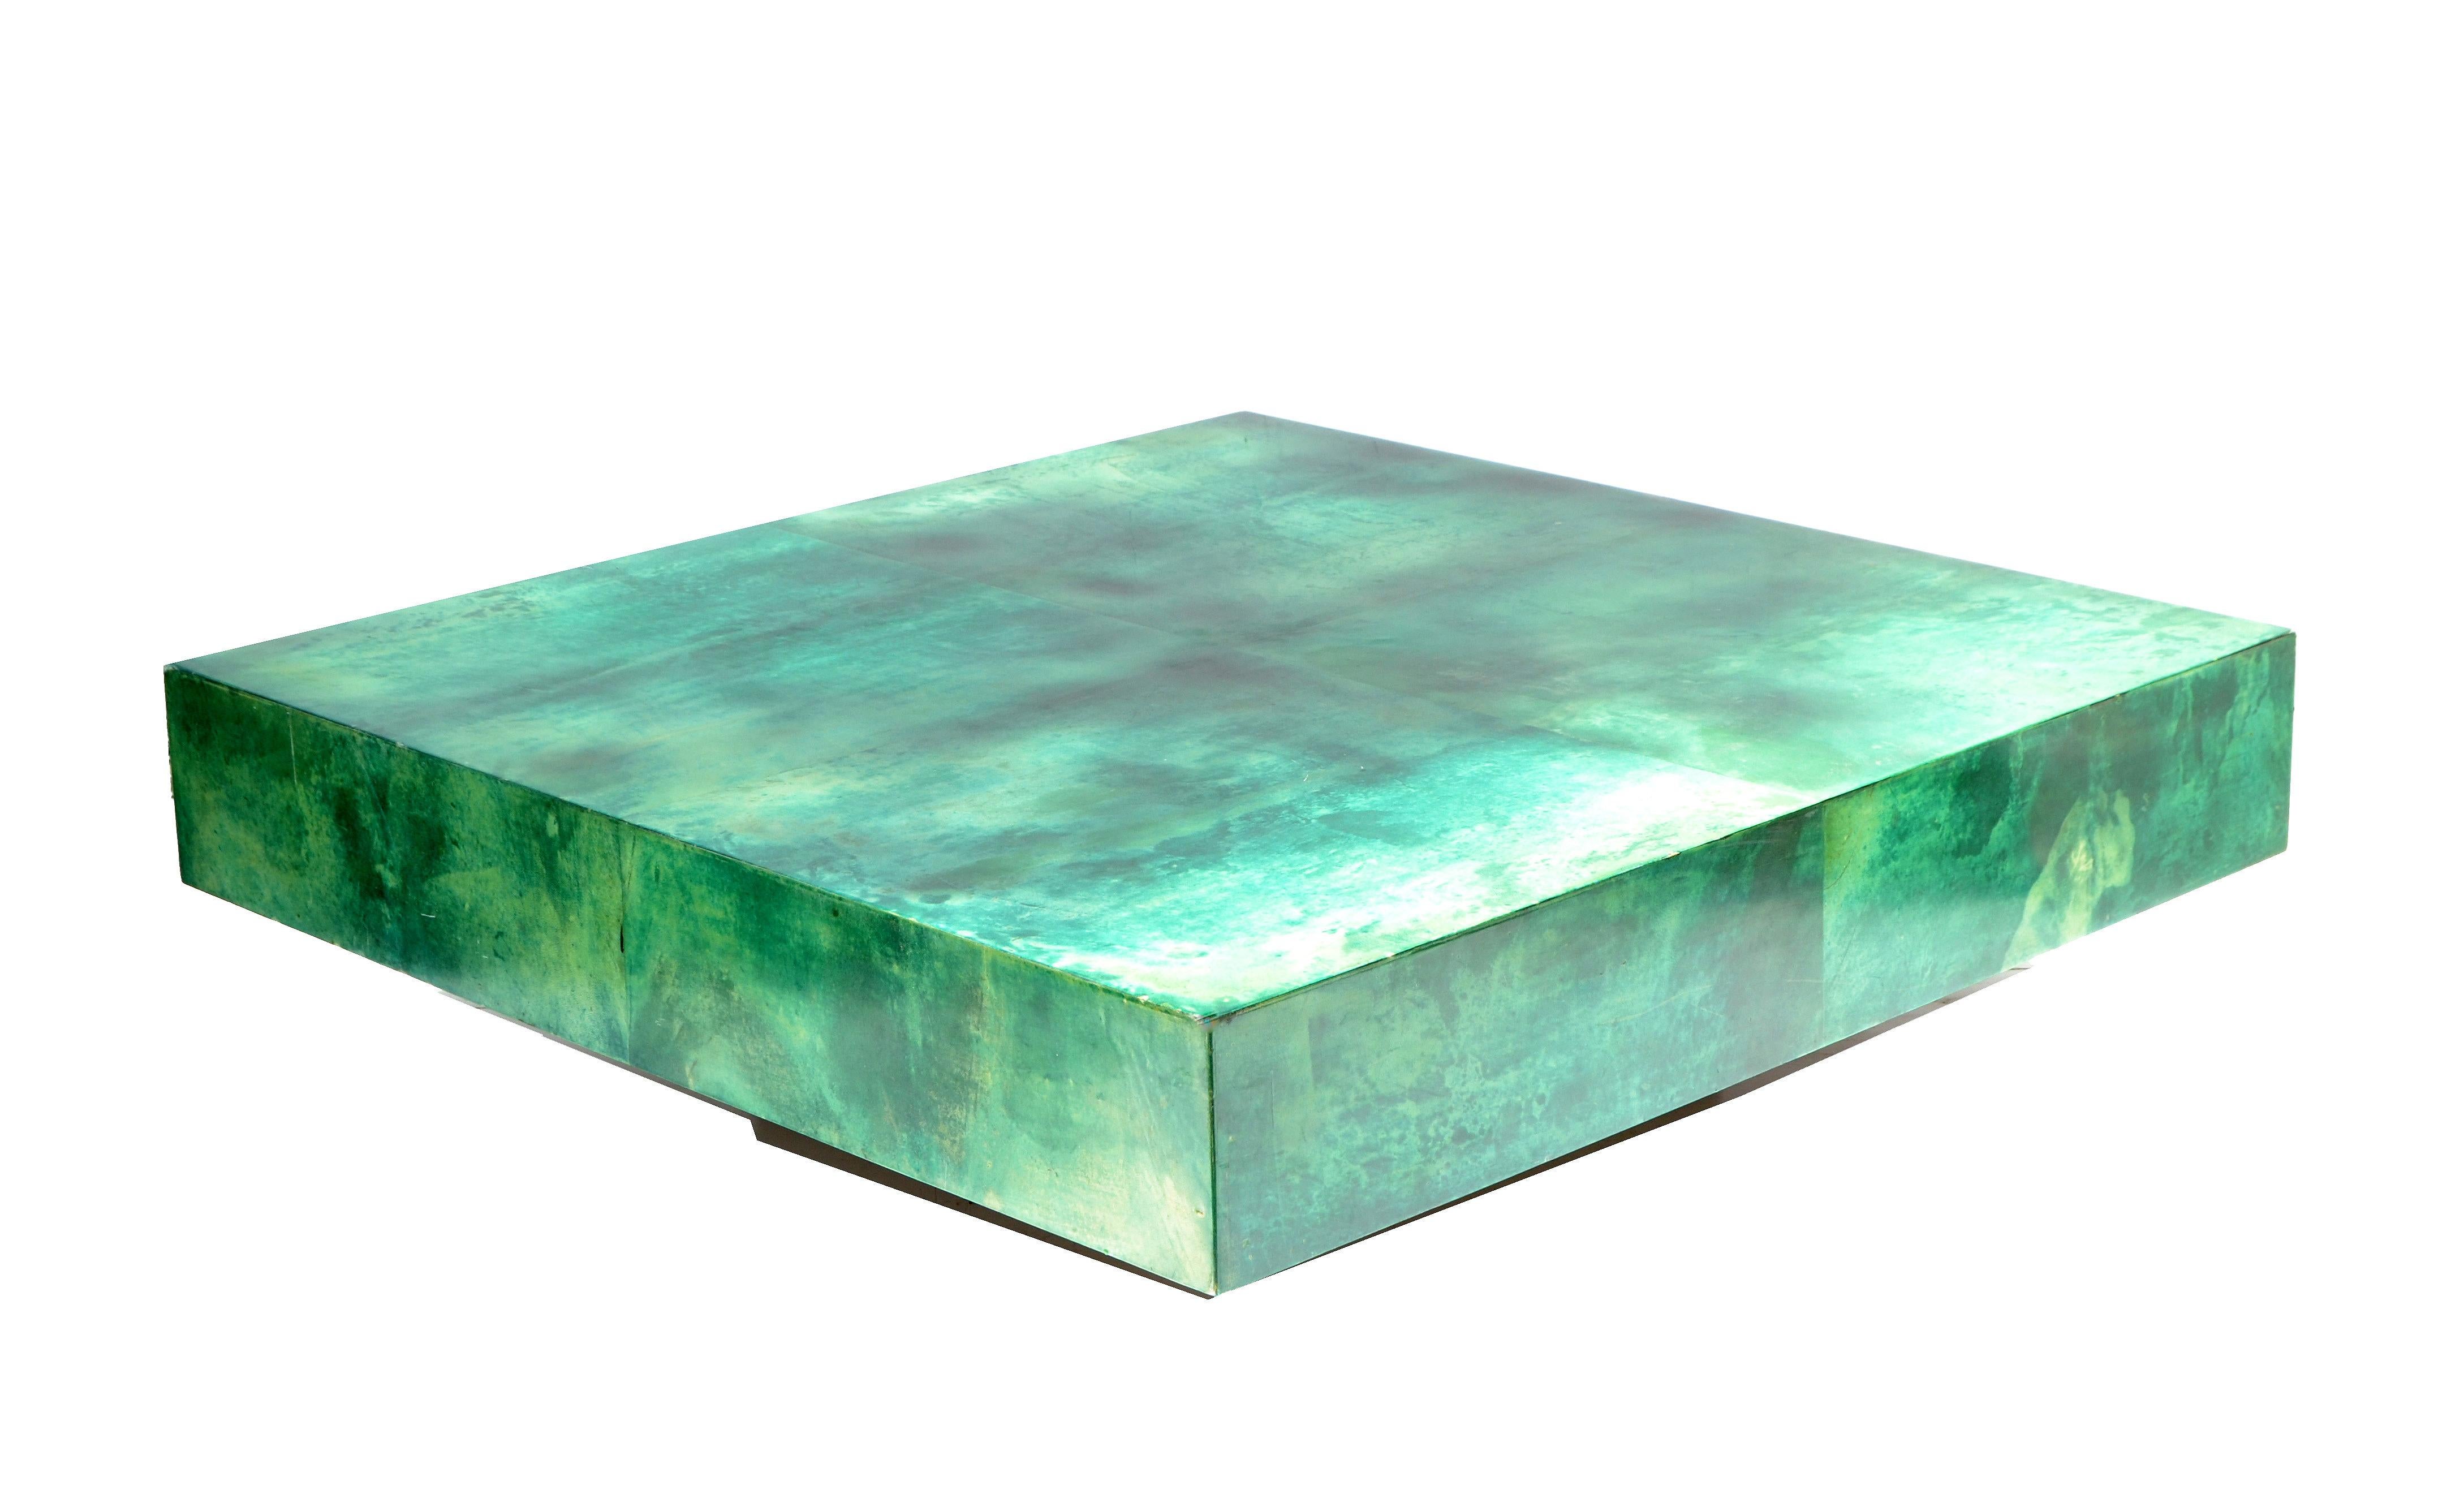 Huge Aldo Tura Coffee / Cocktail Table Emerald Green Lacquered Goatskin Top  5